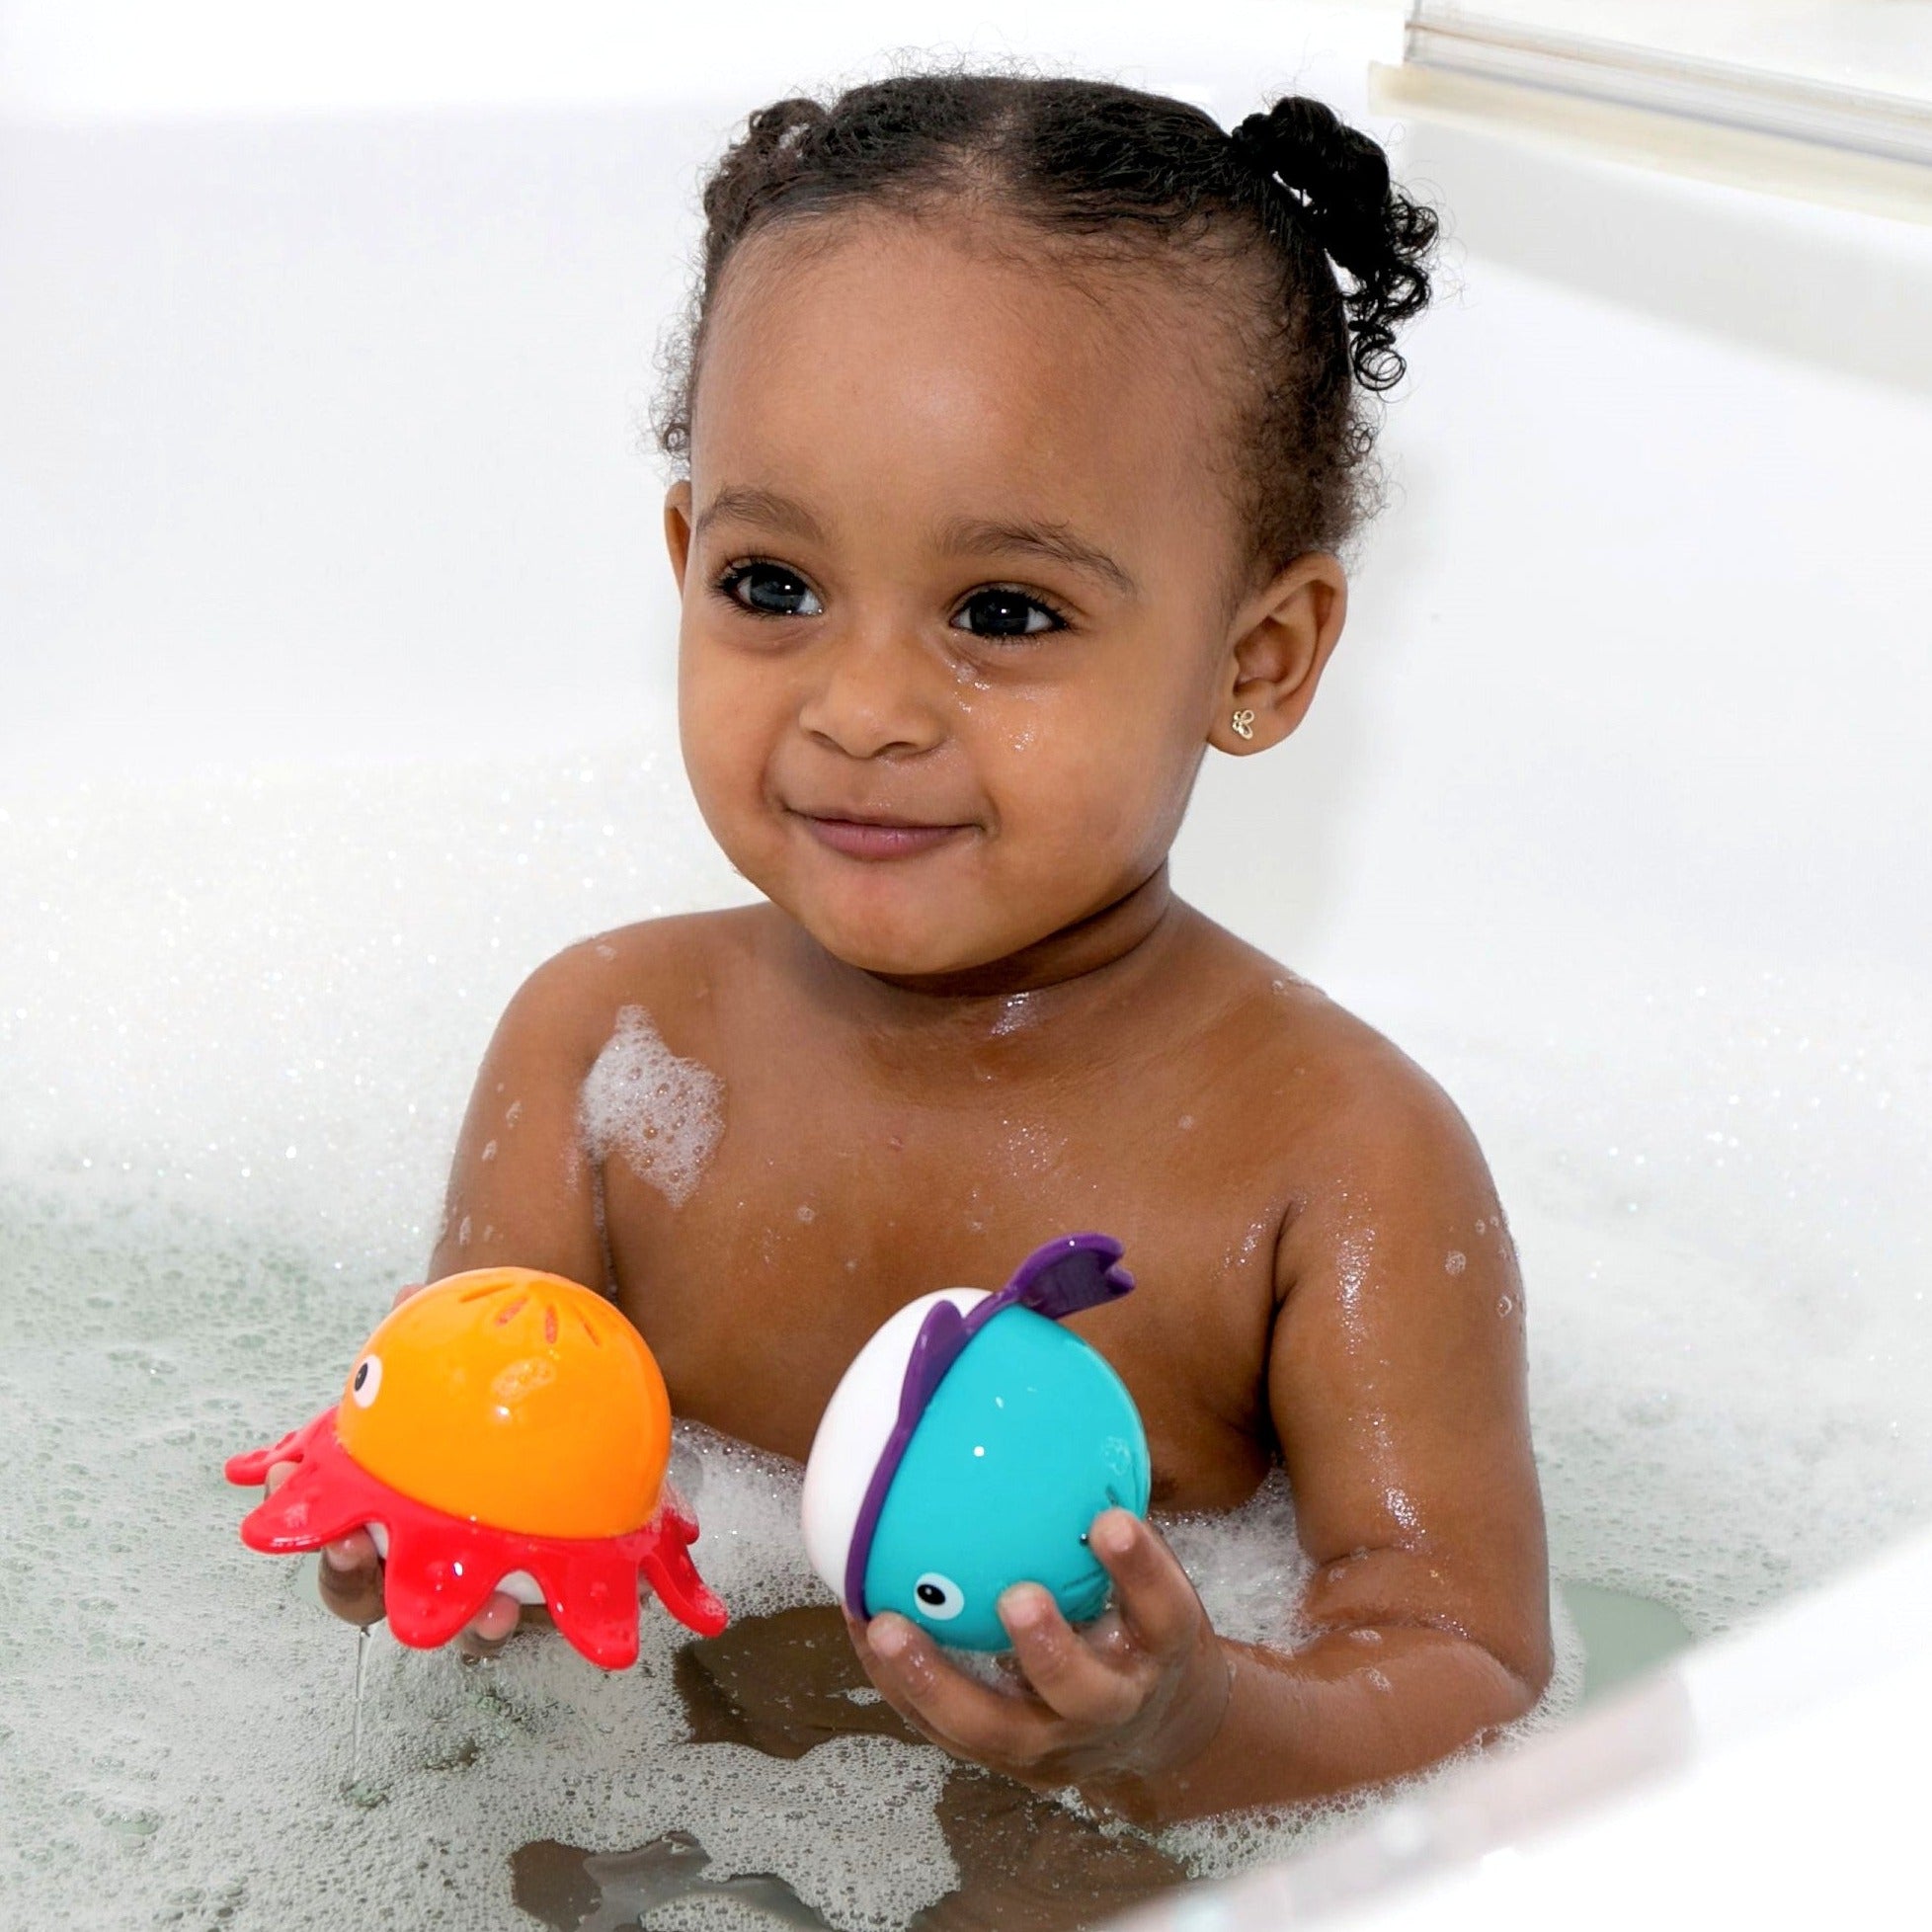 Edushape Tub Buddies, With floating heads and friendly faces, this Edushape Tub Buddies bath toy keeps babies entertained during bath time. These Edushape Tub Buddies are great for hand-eye coordination and fine motor skills, the Edushape Tub Buddies are a relaxing tub time activity for little ones who love to make a splash! These fun little bath time pals are perfectly shaped for little hands to grip easily, whilst being great for both visual and tactile sensory development. Dunk, drain and repeat for lots